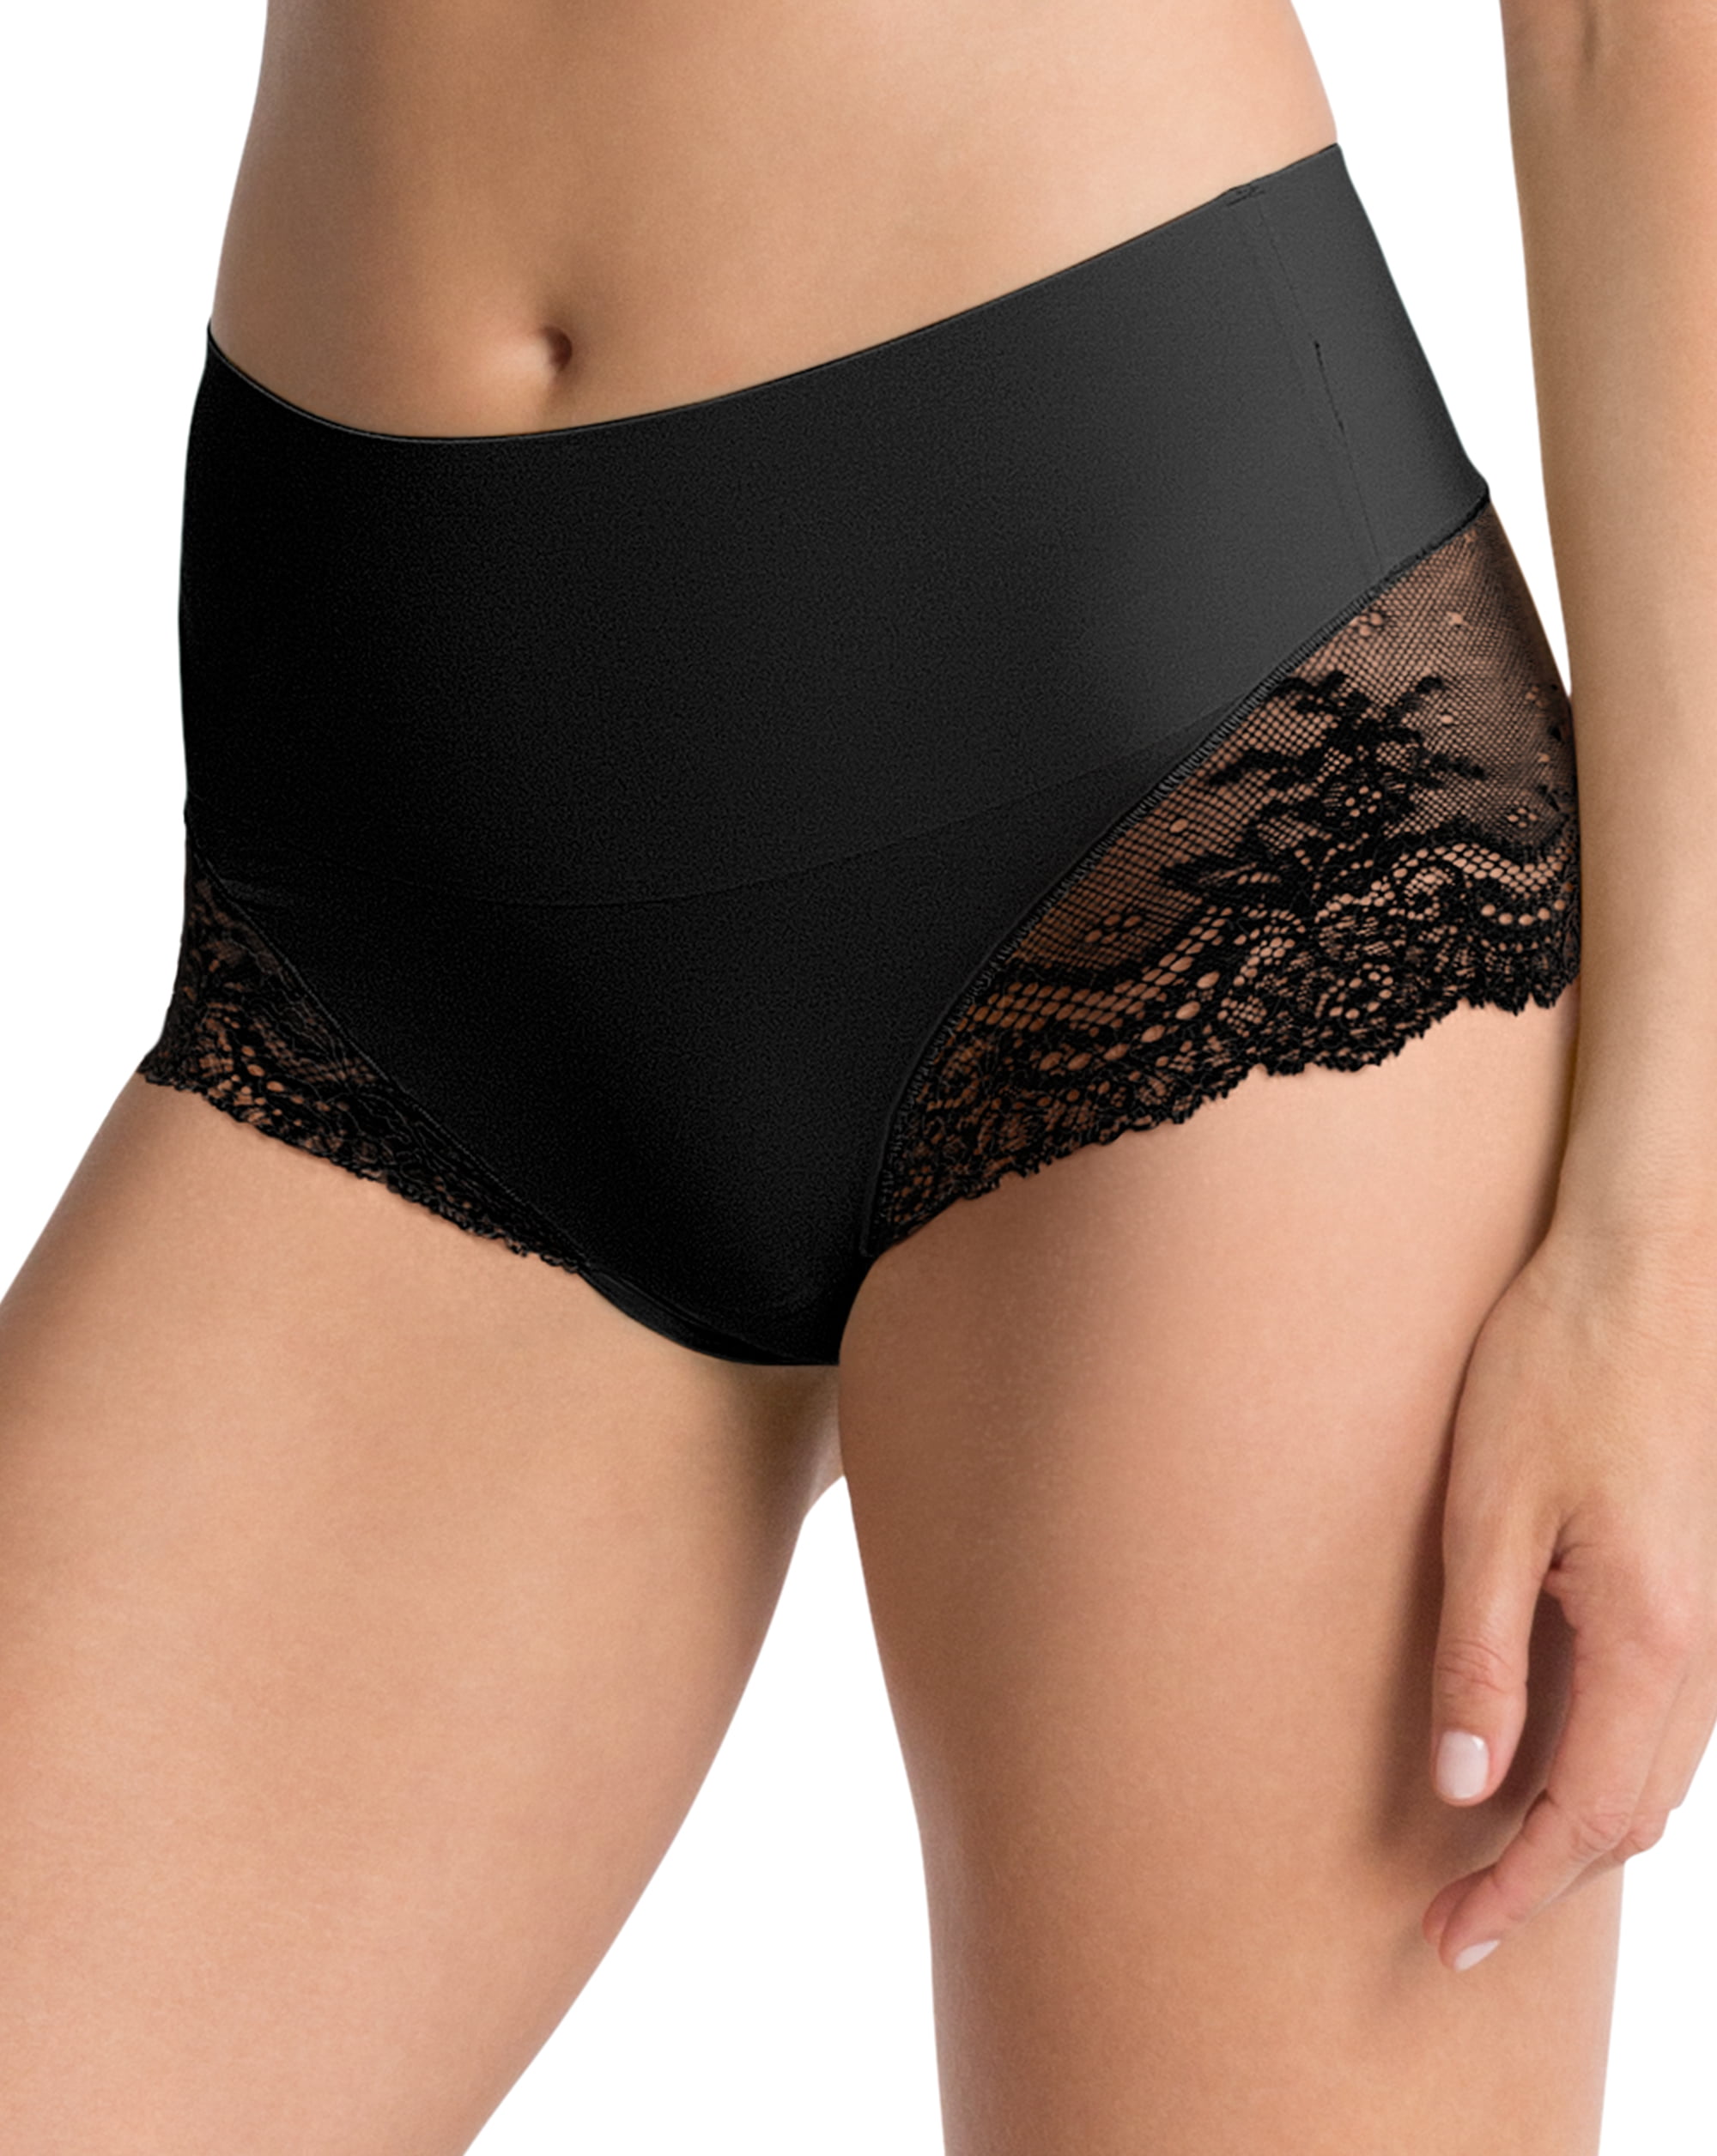 Undie-Tectable Lace Hi-hipster